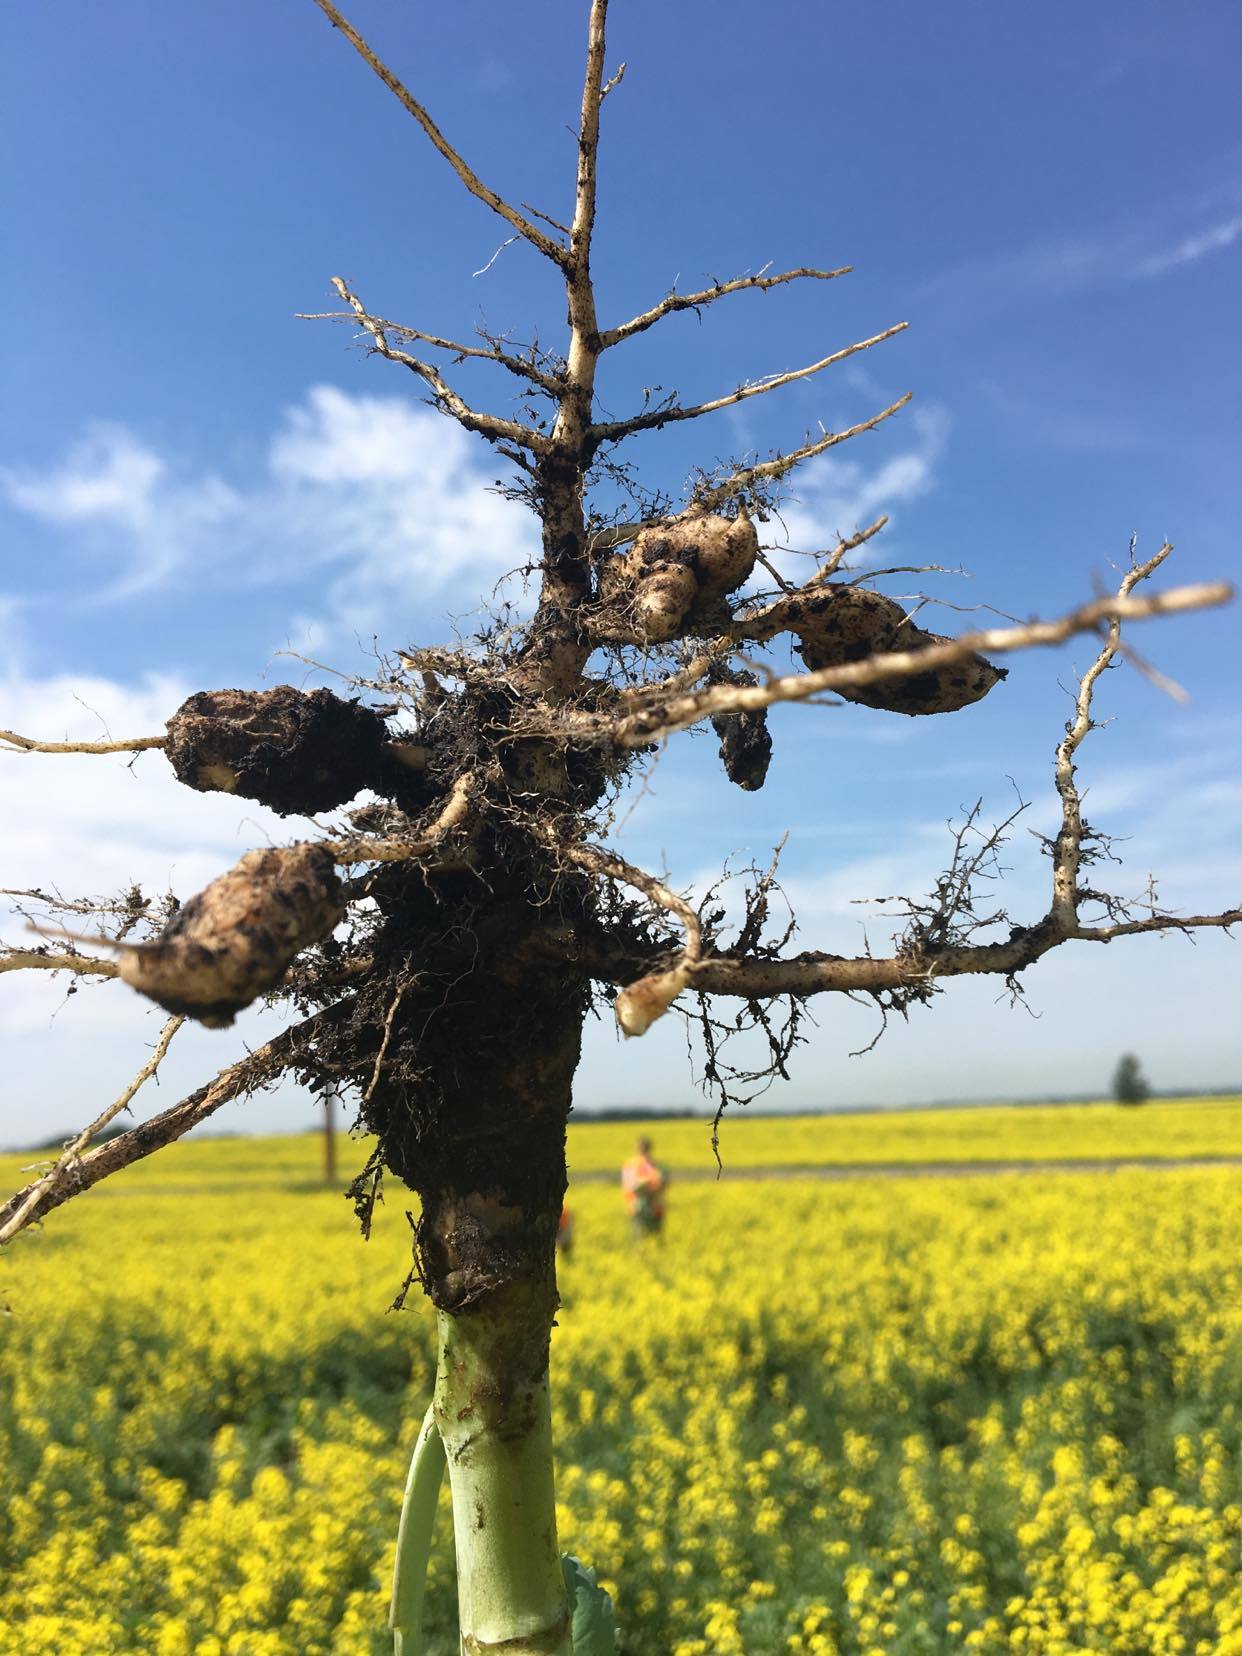 Clubroot